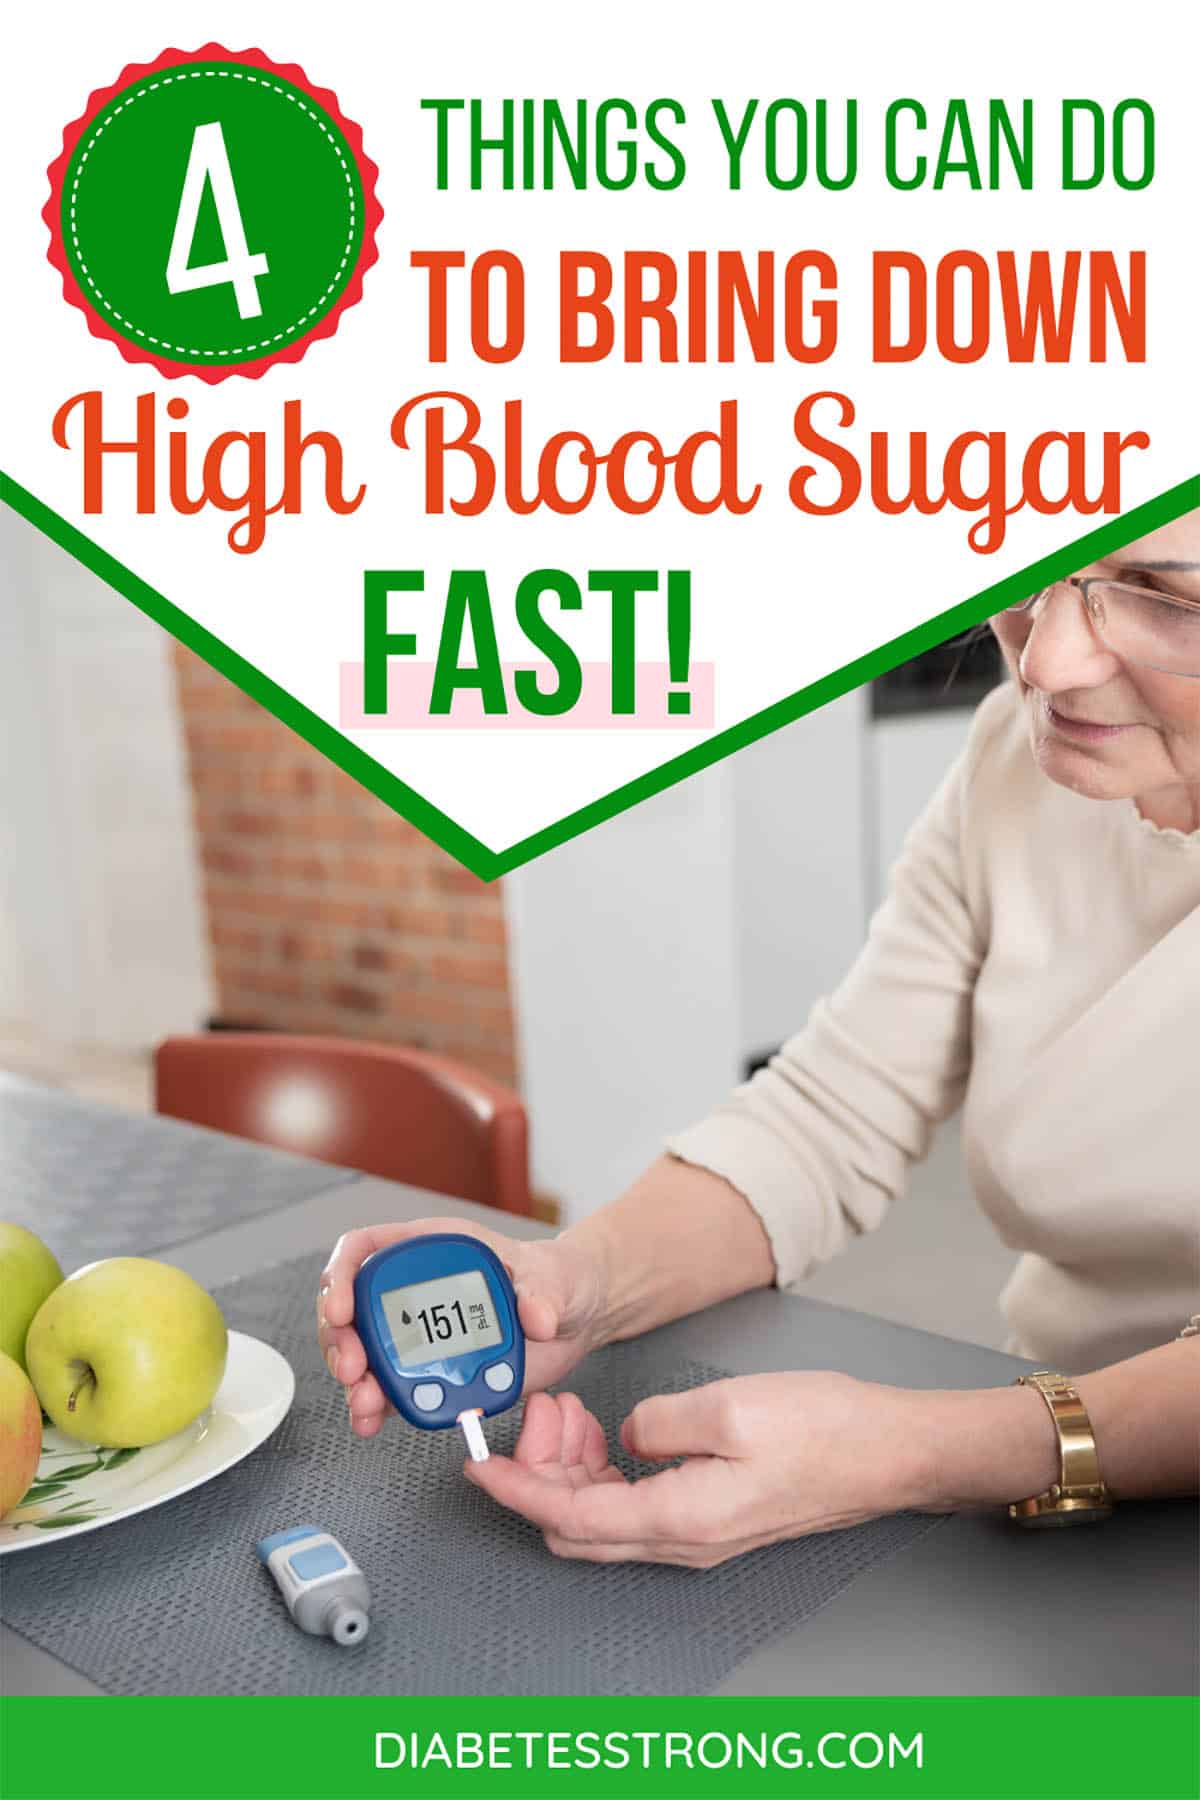 How to Bring High Blood Sugar Down Fast | Diabetes Strong